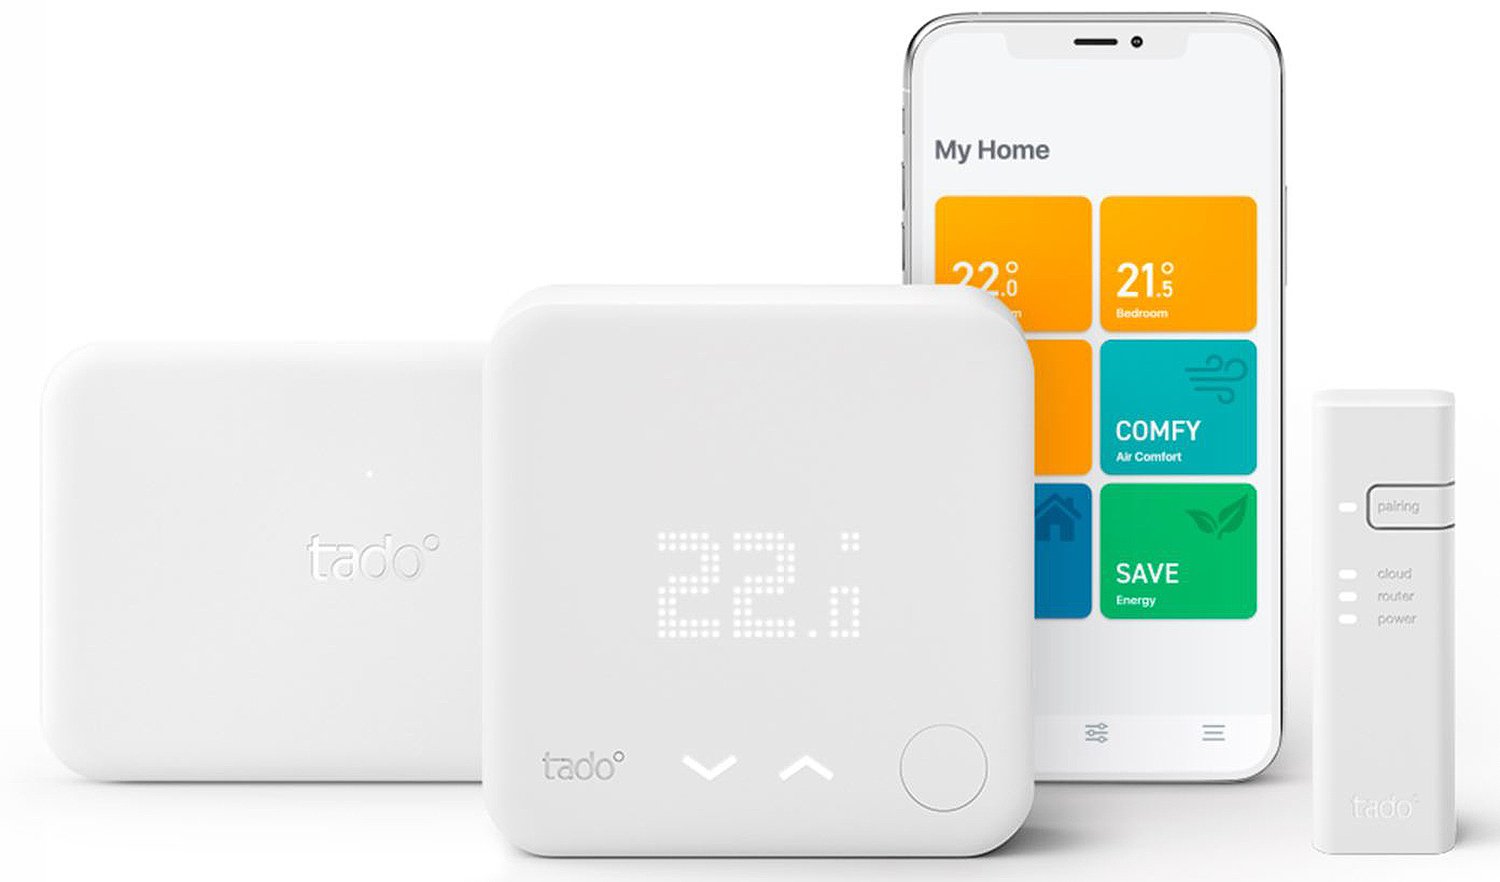 Tado Smart Thermostat Starter Kit V3+ with Hot Water Control Review